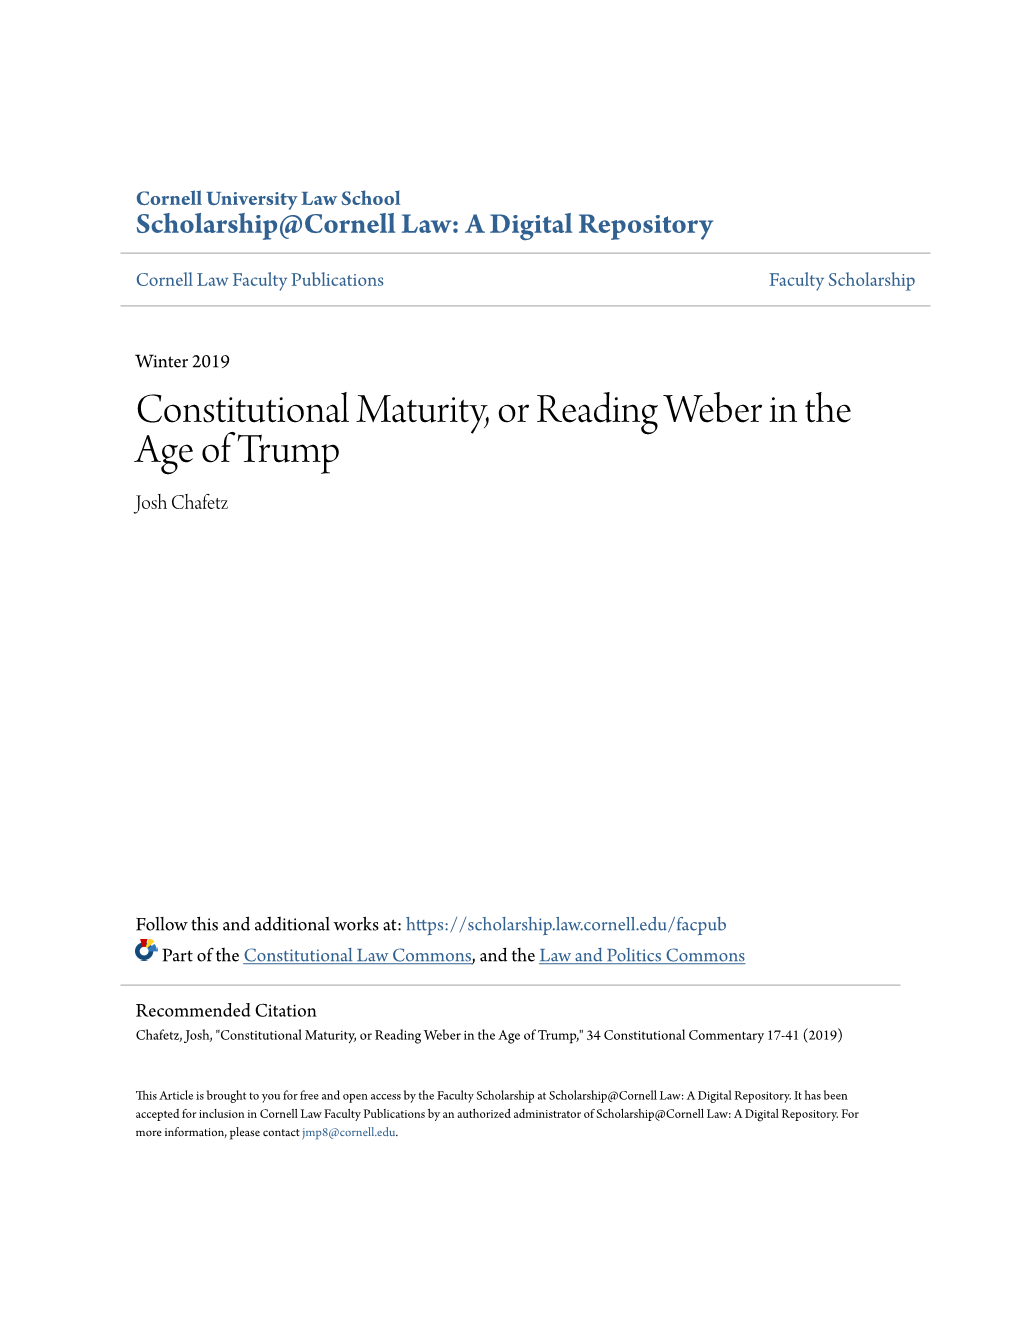 Constitutional Maturity, Or Reading Weber in the Age of Trump Josh Chafetz